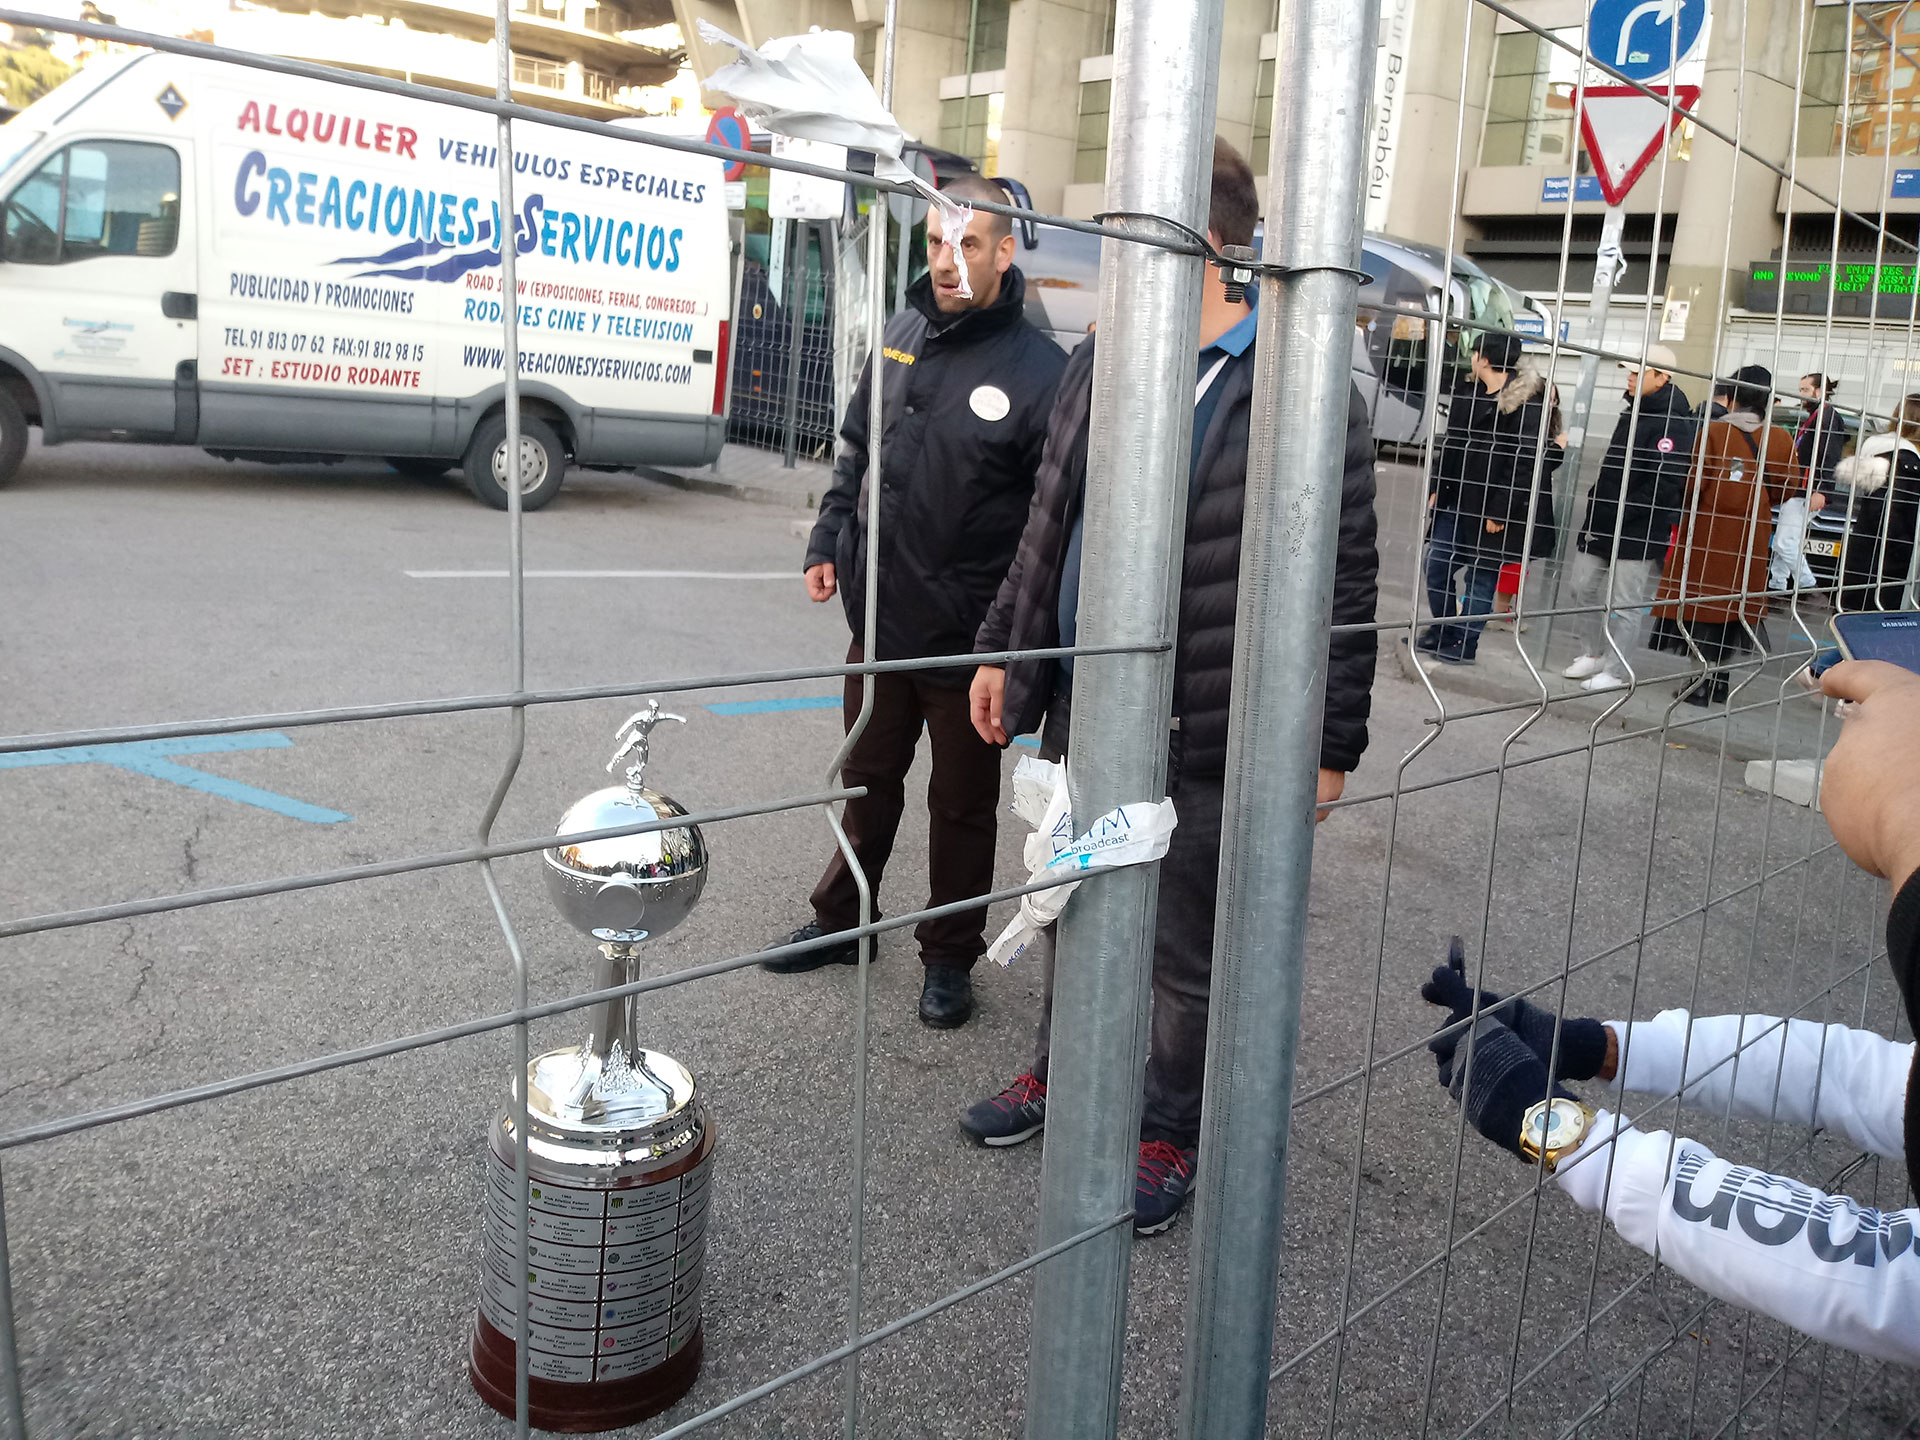 An unusual postcard from the remembered final in Madrid-2018: in the vicinity of the Bernabéu, the desired Copa Libertadores appears resting on the ground